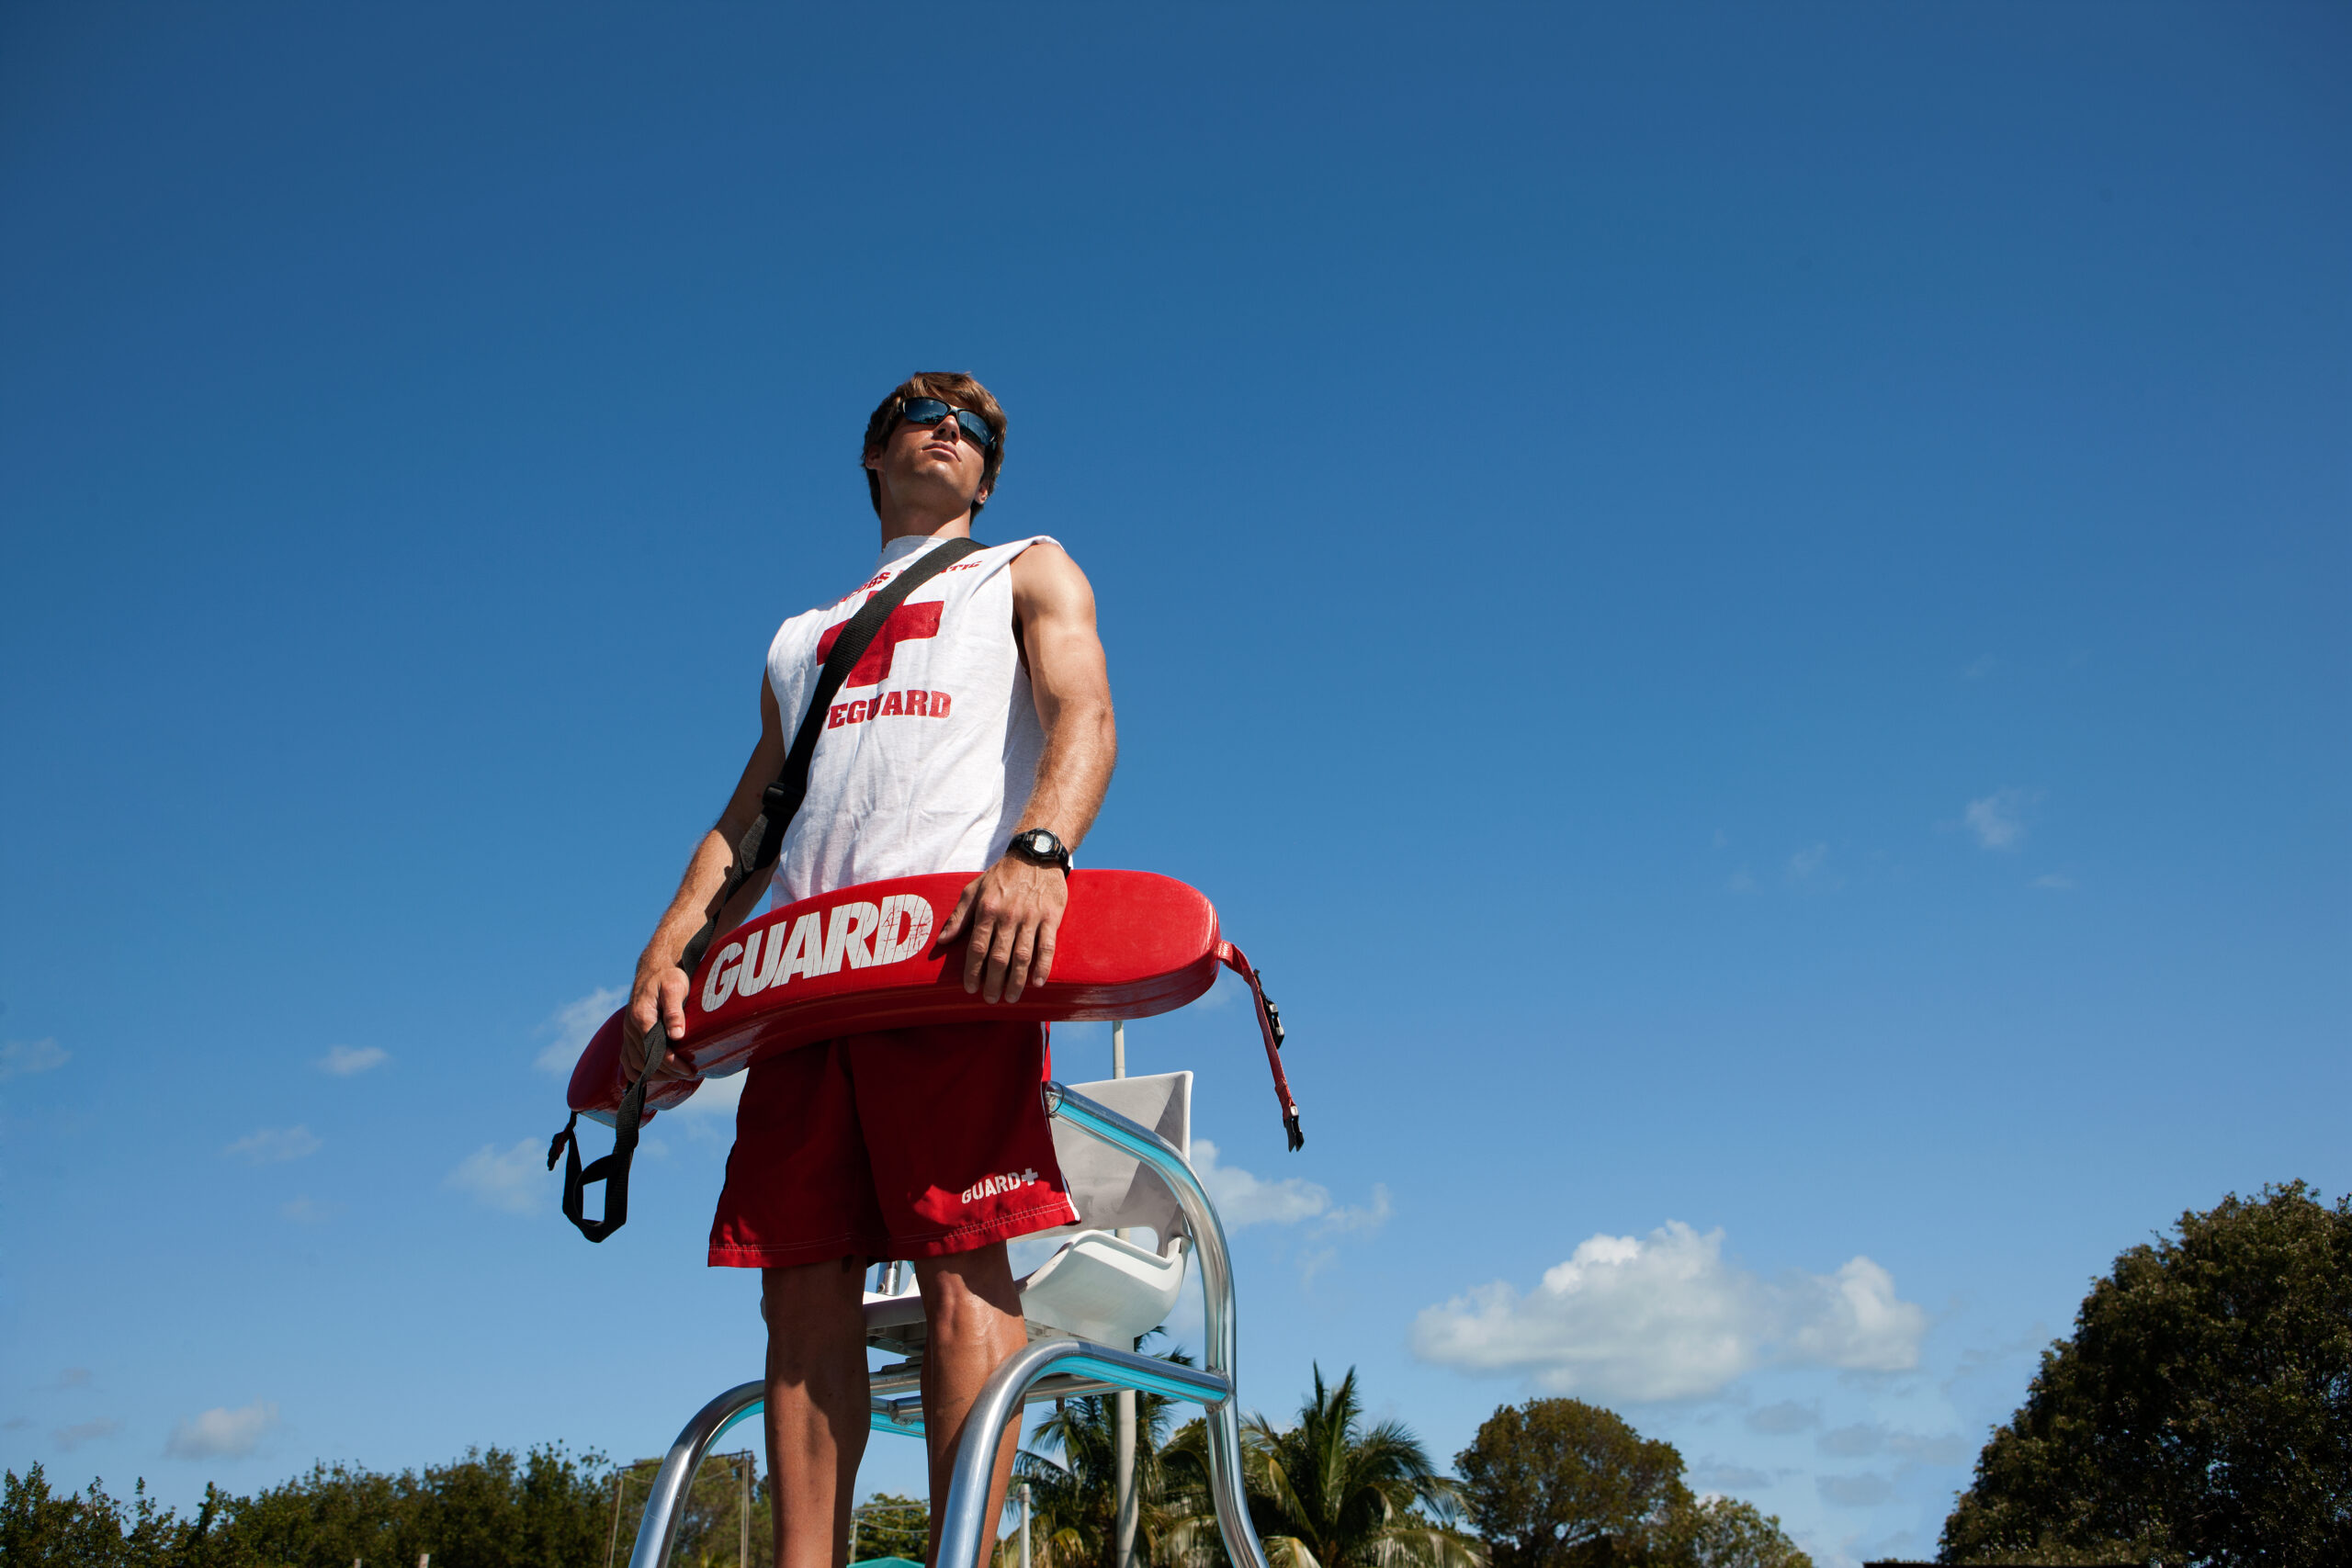 21 year old male, posing as a lifeguard at Jacobs Aquatic Center, wearing lifeguard shirt and  holding lifeguard's rescue buoy.